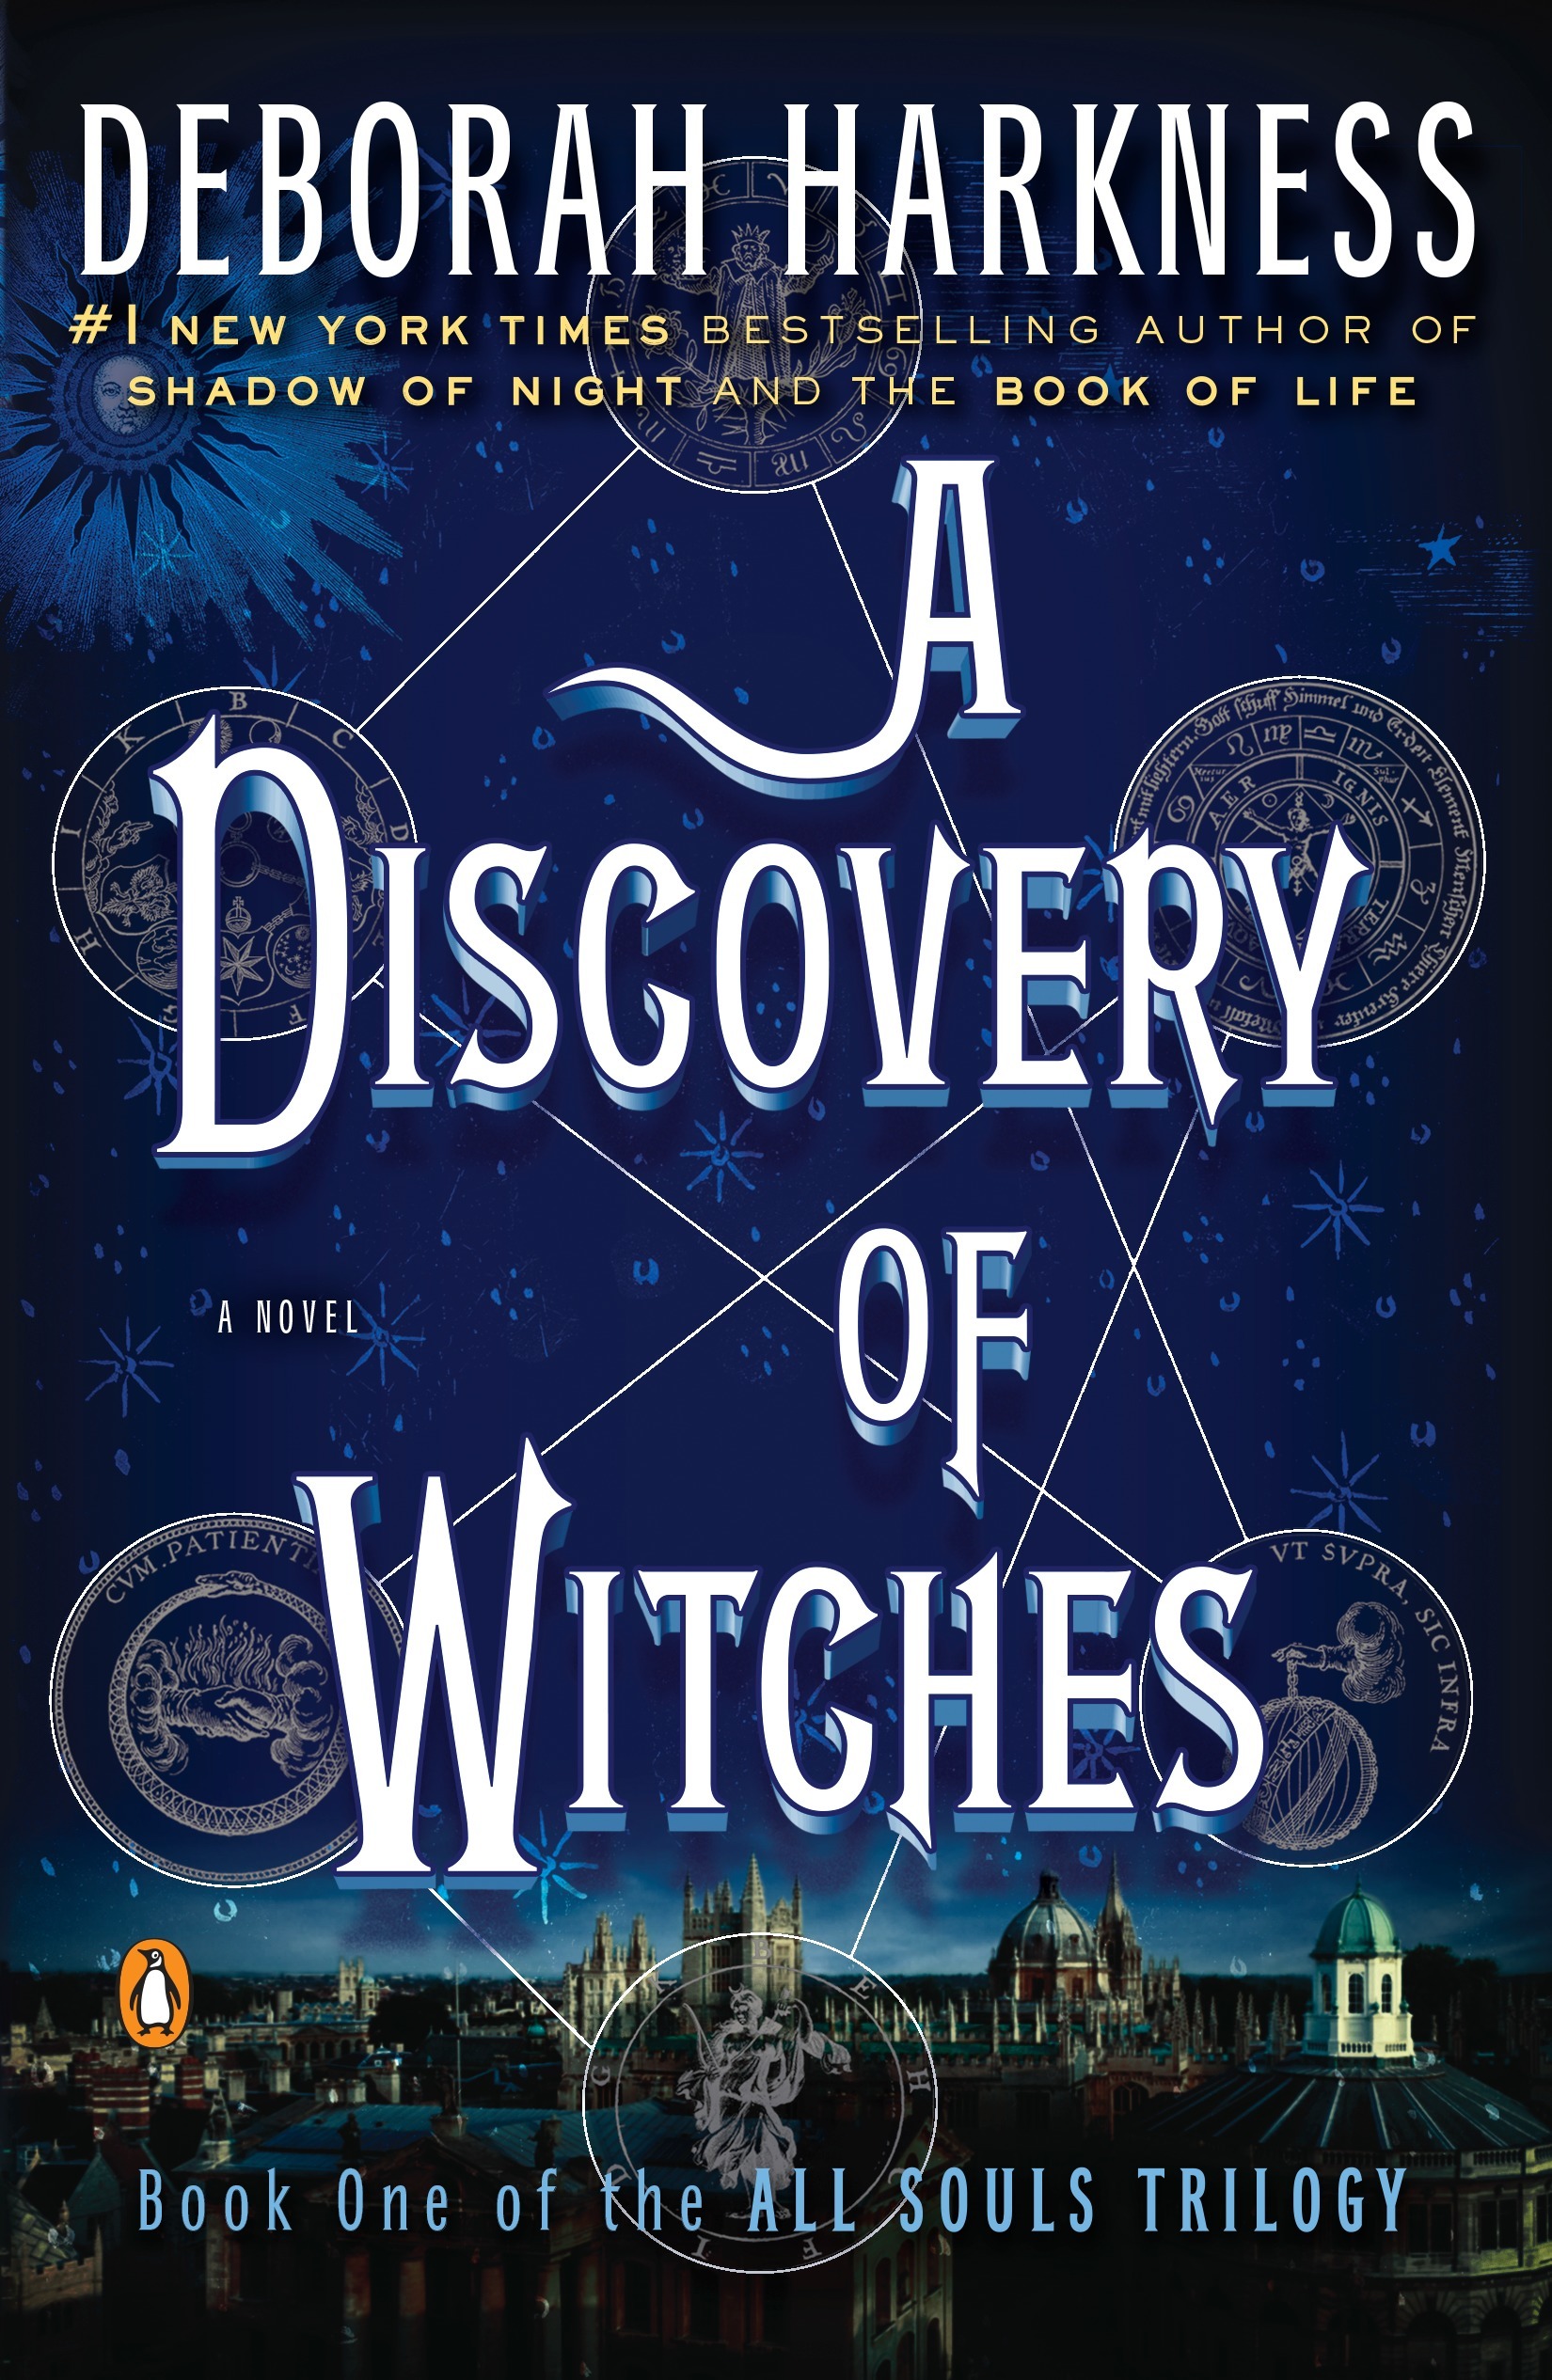 [EPUB] All Souls #1 A Discovery of Witches by Deborah Harkness